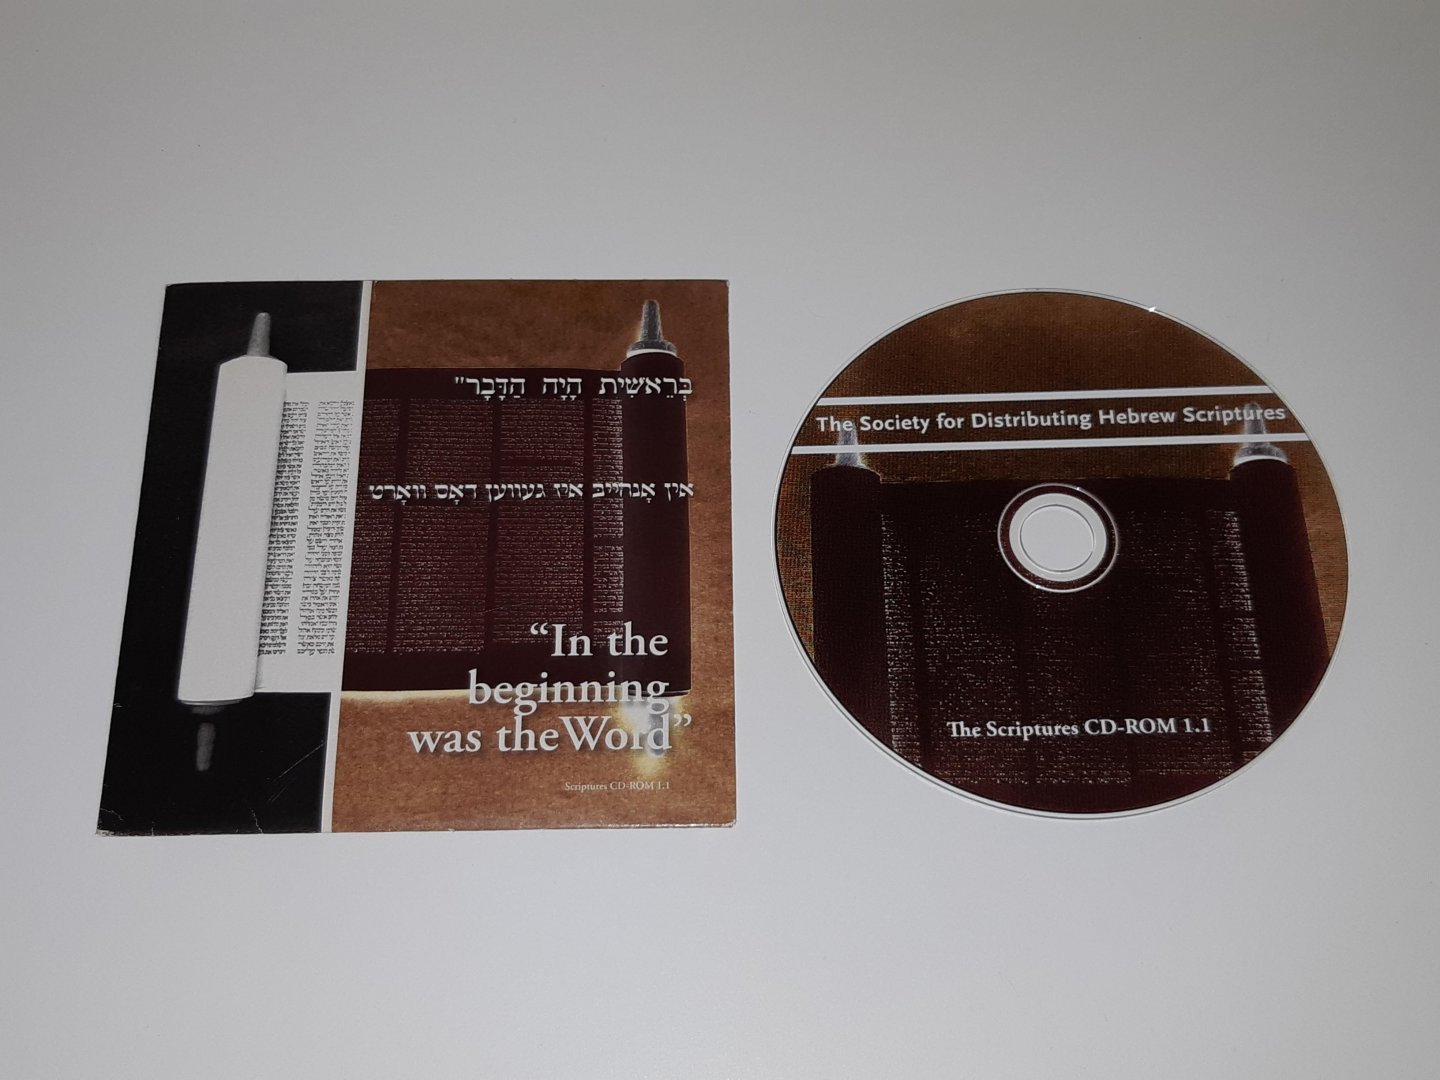  - In the beginning was the Word. Scriptures CD-ROM 1.1